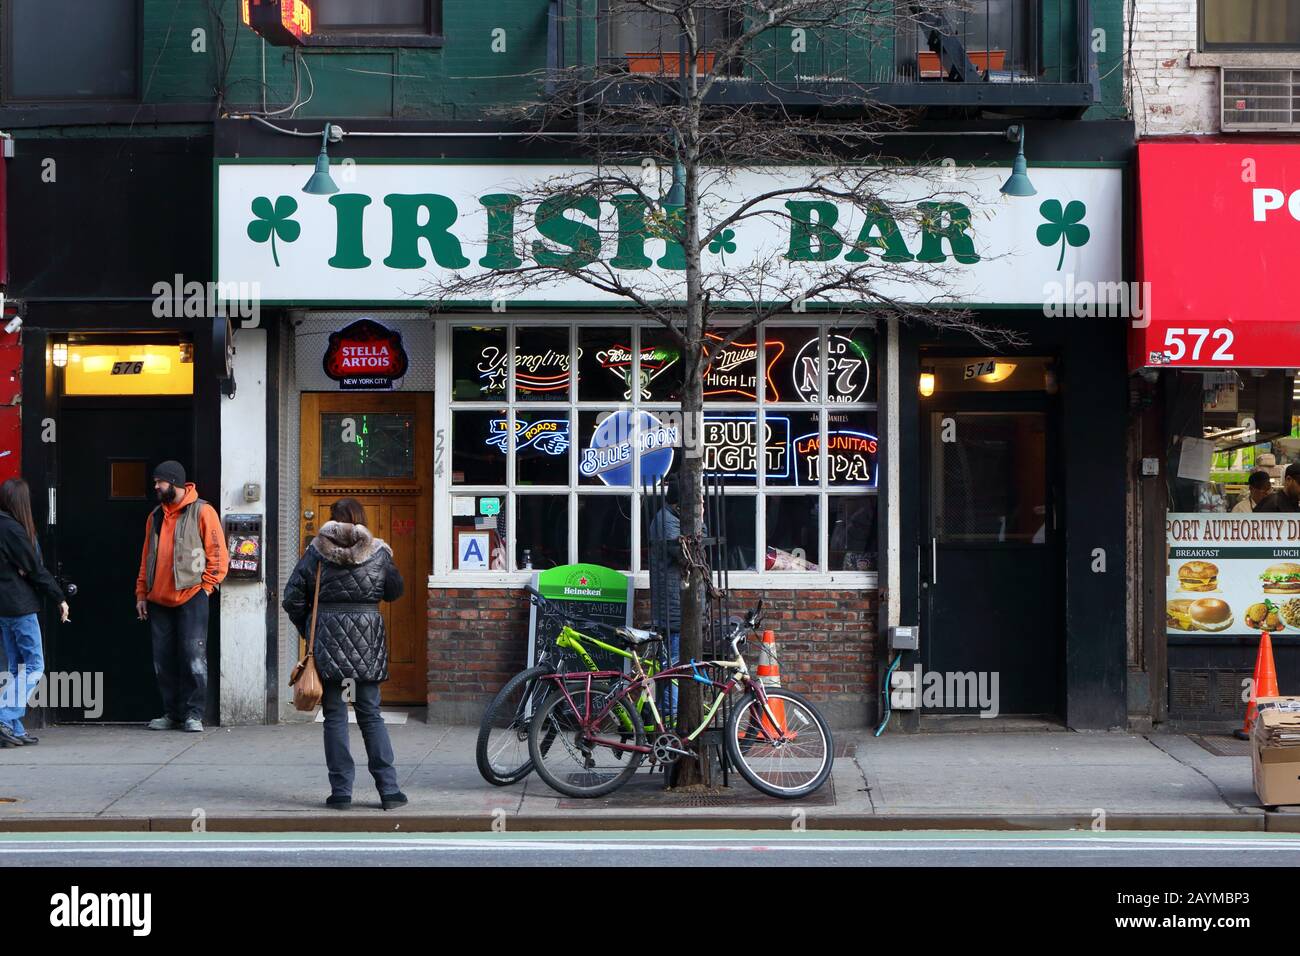 [historical storefront] Dave's Tavern Irish Bar, 574 9th Ave, New York, NYC storefront photo of a bar in the Hell's Kitchen neighborhood Stock Photo